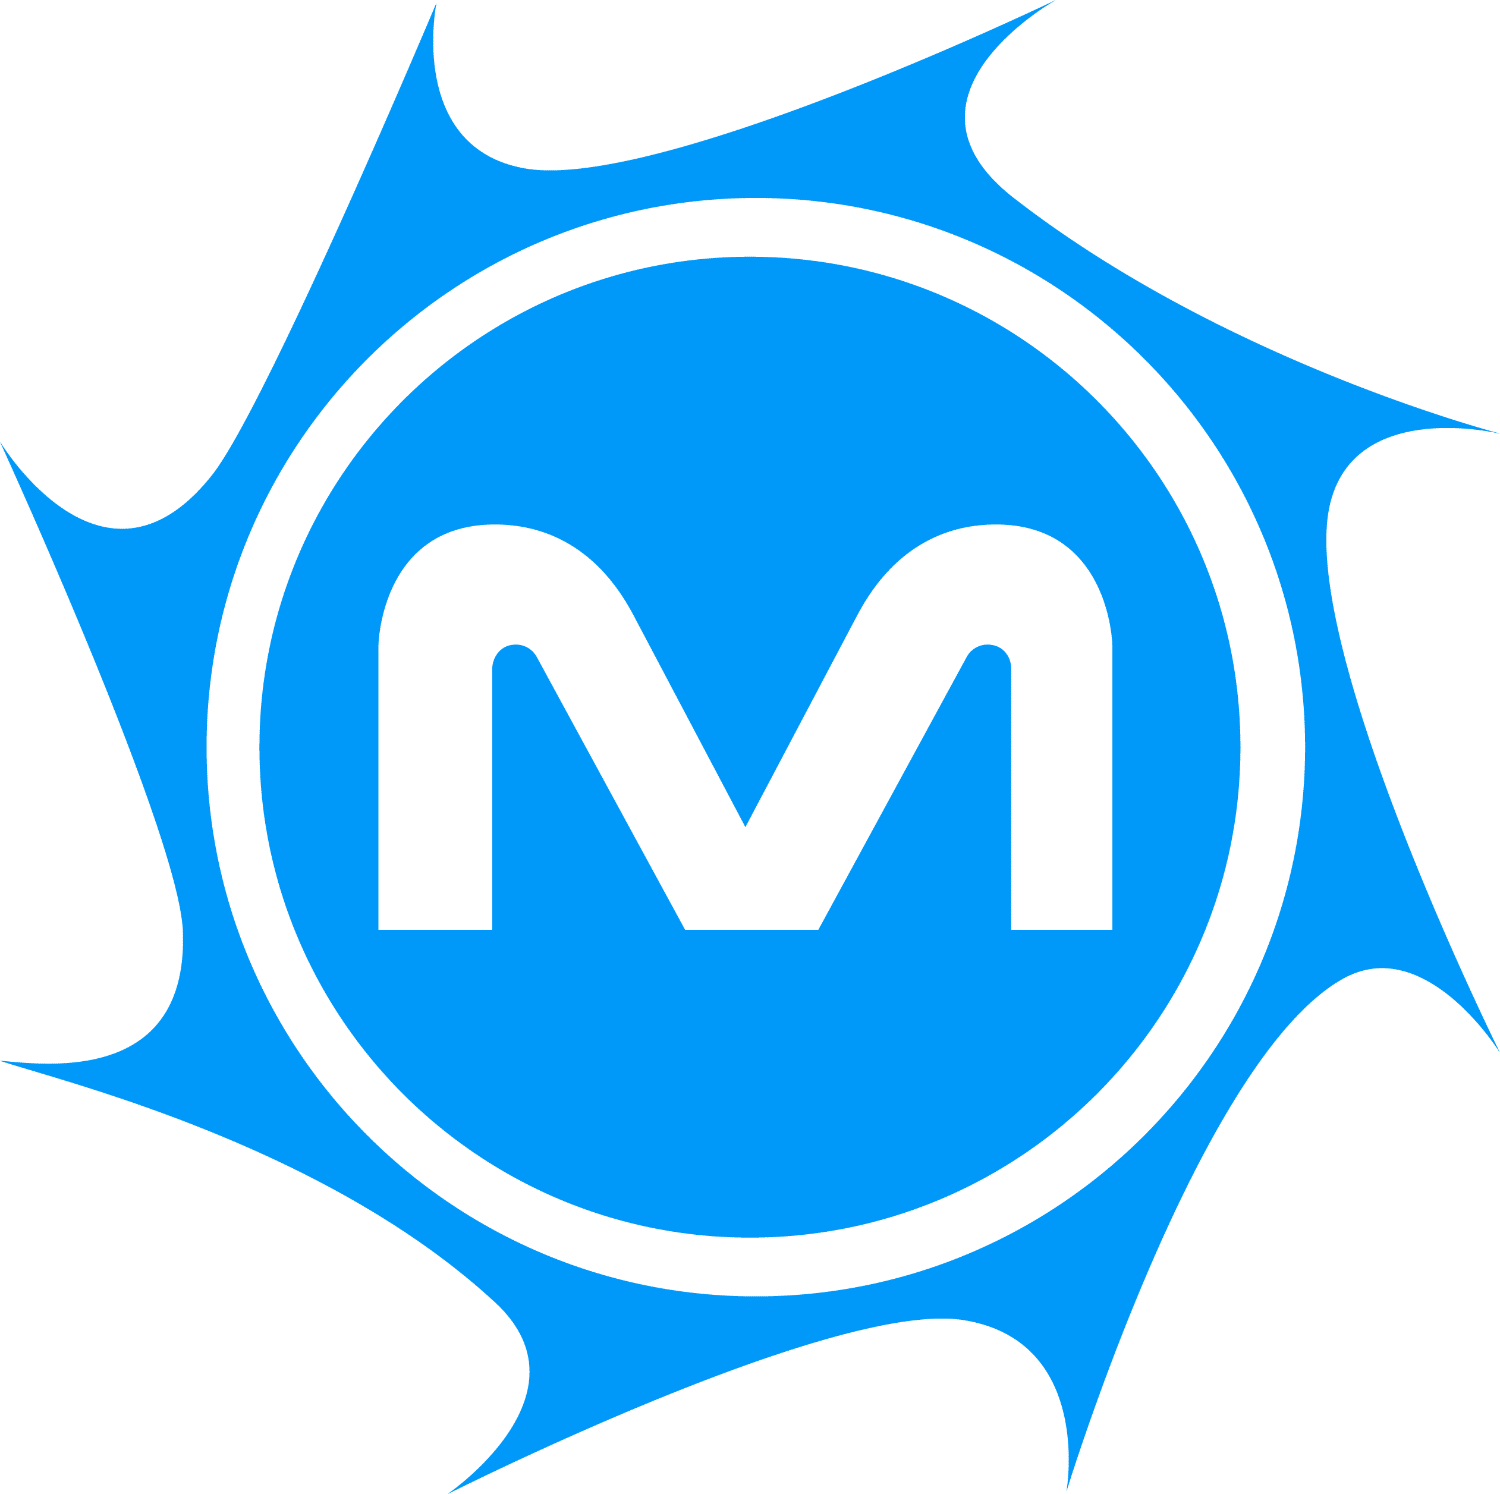 Blue sun icon eight points and an "M" cutout in the middle